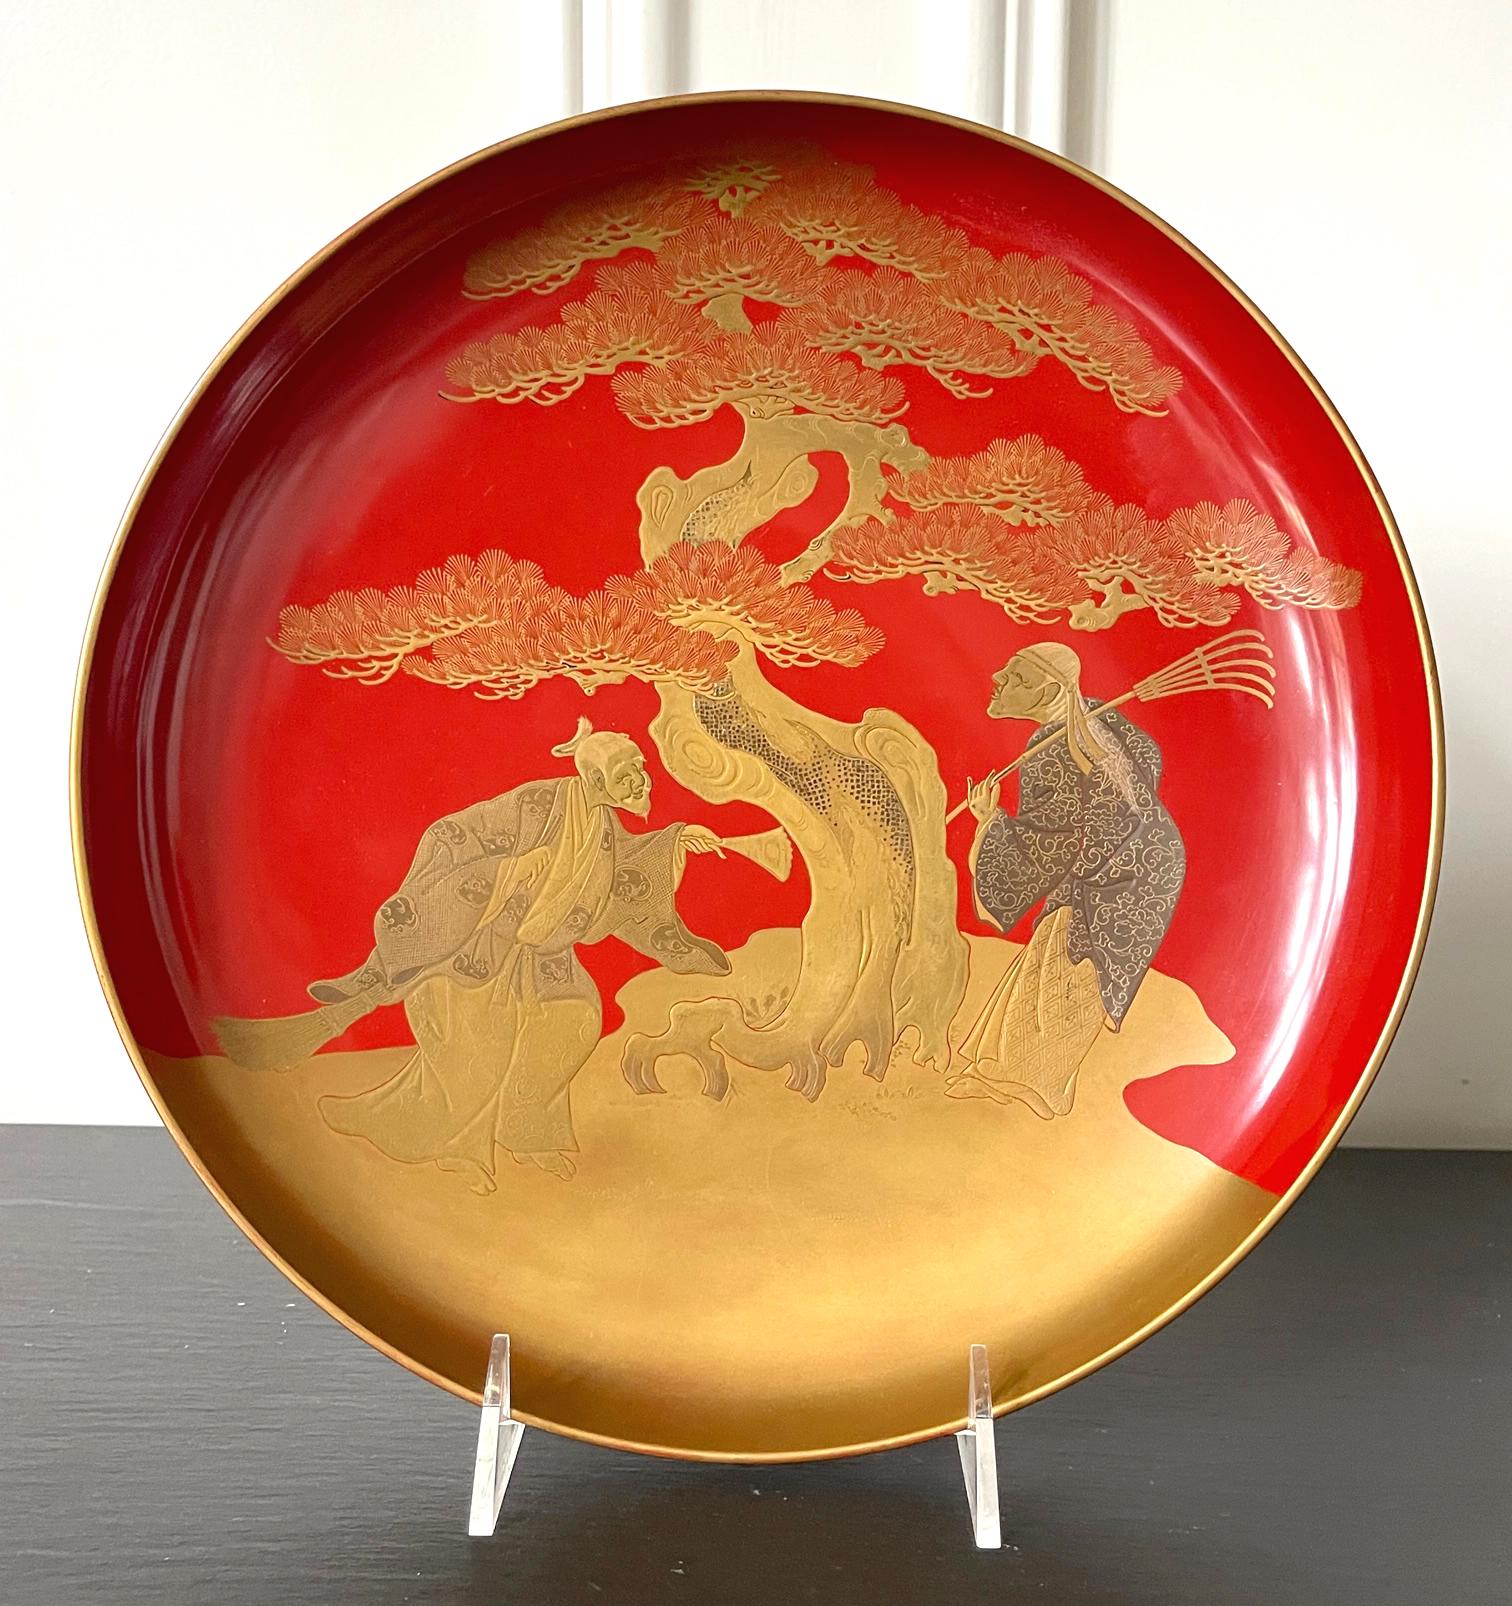 A large circular plate with a short stem base in Vermillion lacquer color from Late Meiji Period circa end of 19th century to early 20th century. The surface was decorated with a very fine maki-e picture that depicts Takasago story. The legend is